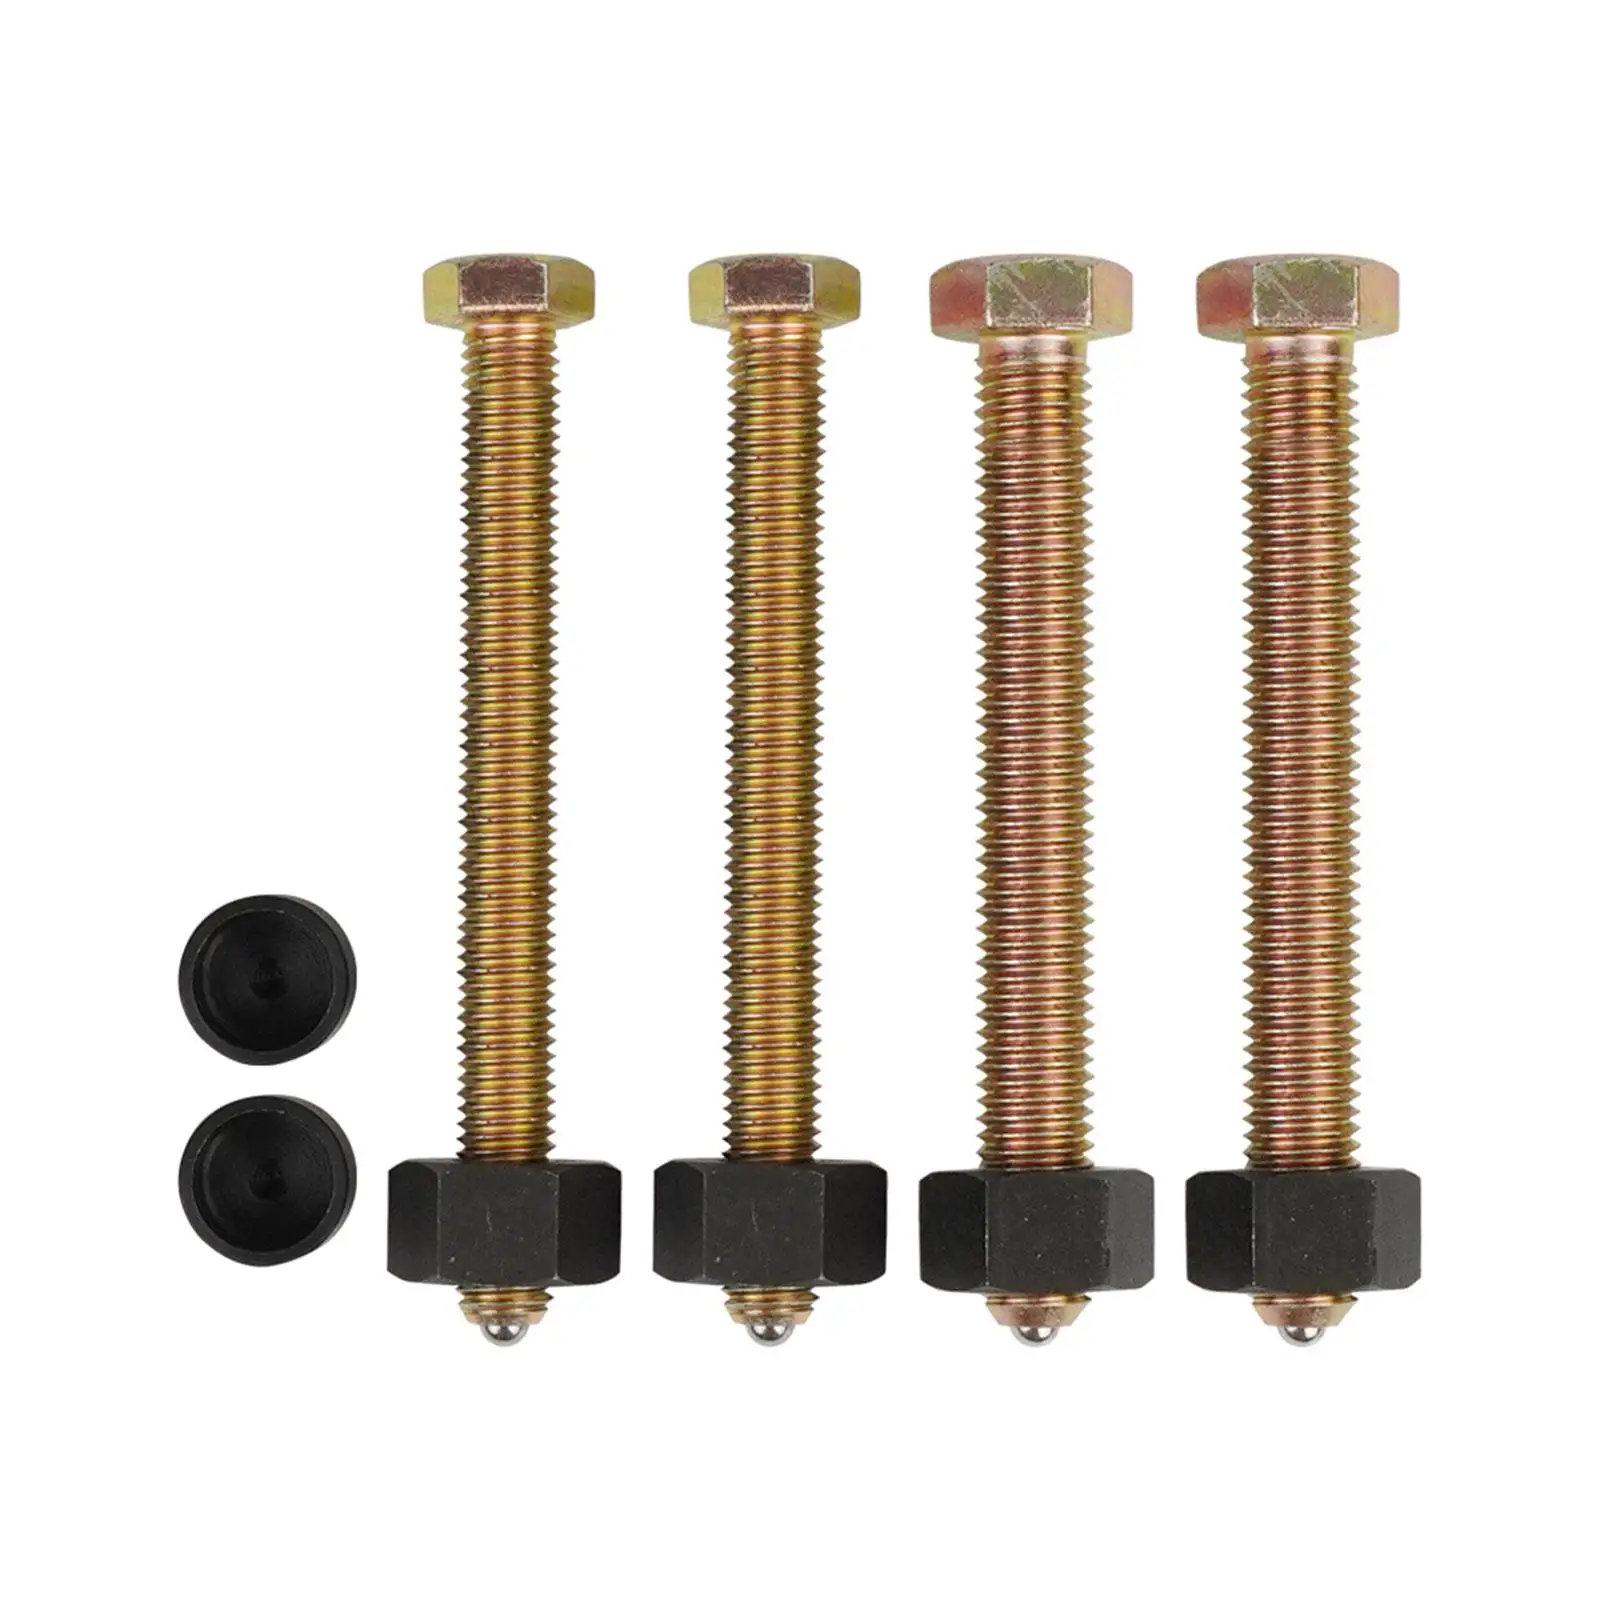 78834 Bolts Assembly Accessory Replaces Impact Rated Hub Removal Bolt Set